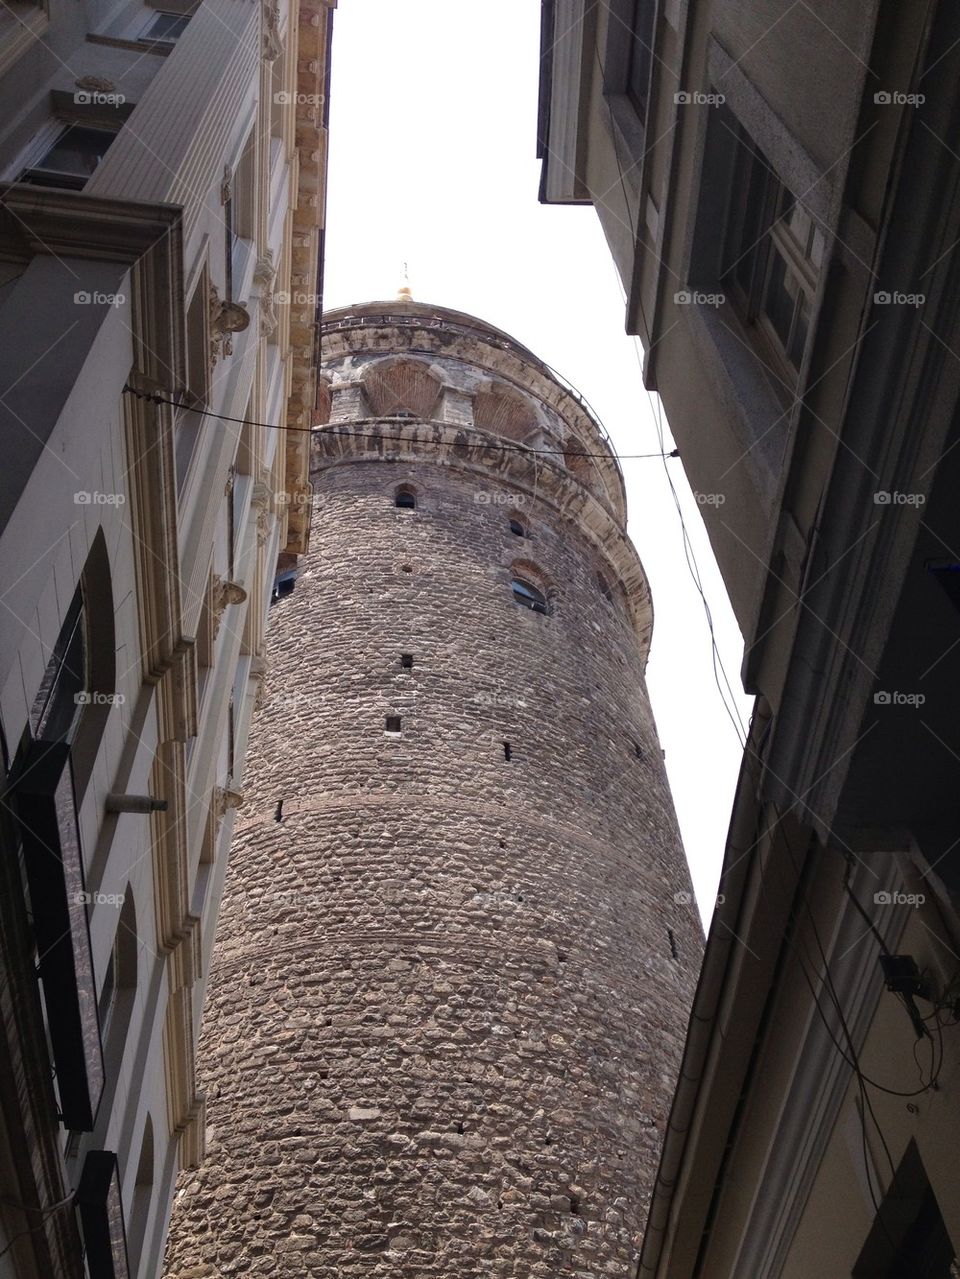 place tower turkey historical by aylinpinarr